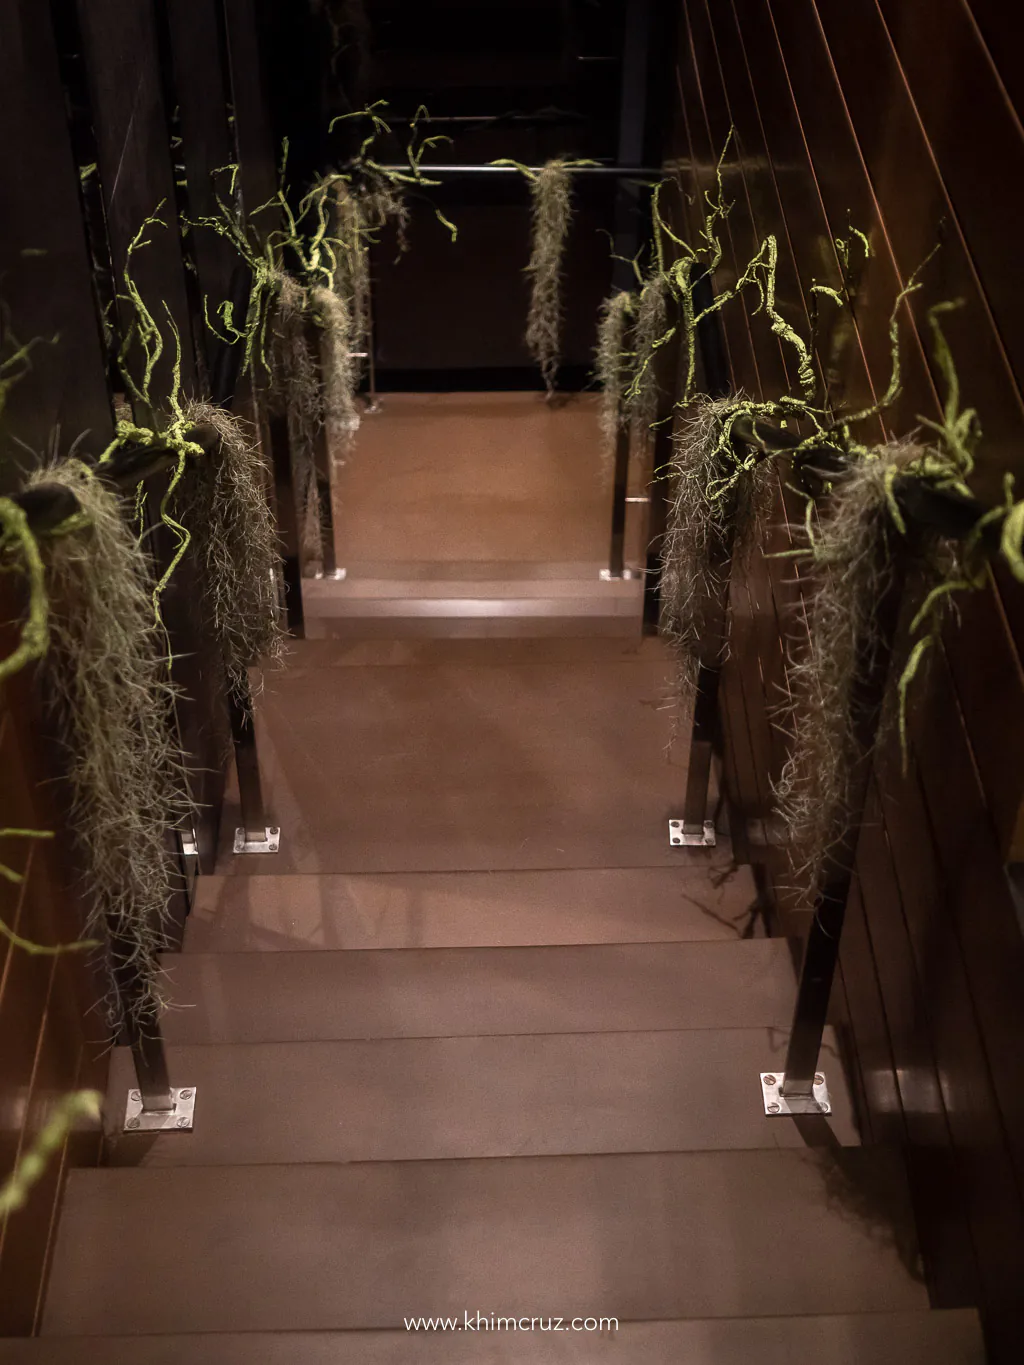 vines on stair hand rail at priore cafe halloween event